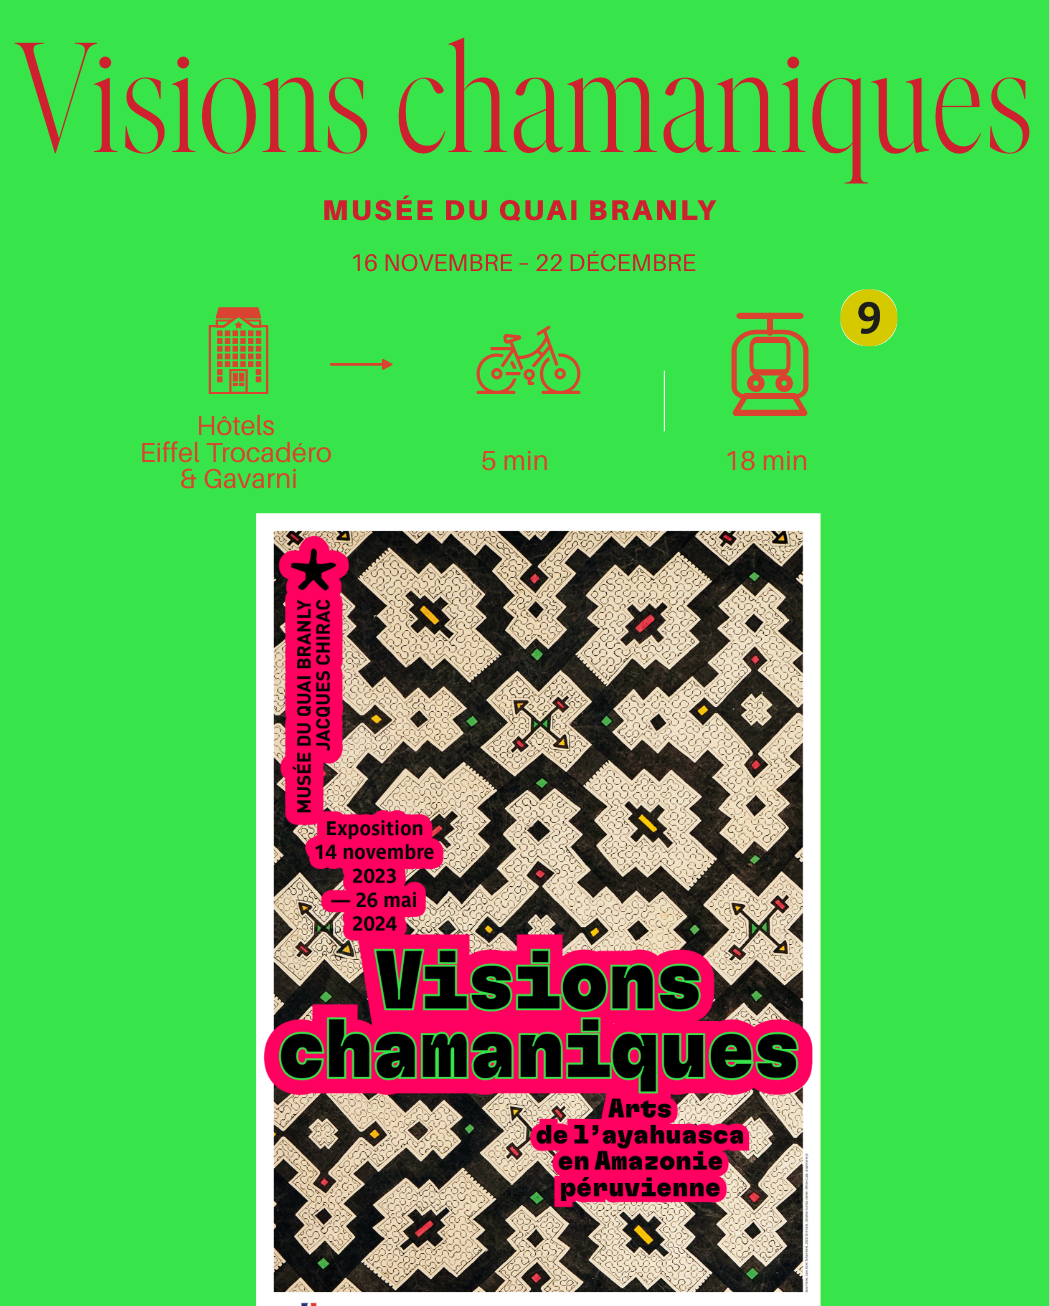 Visions Chamaniques